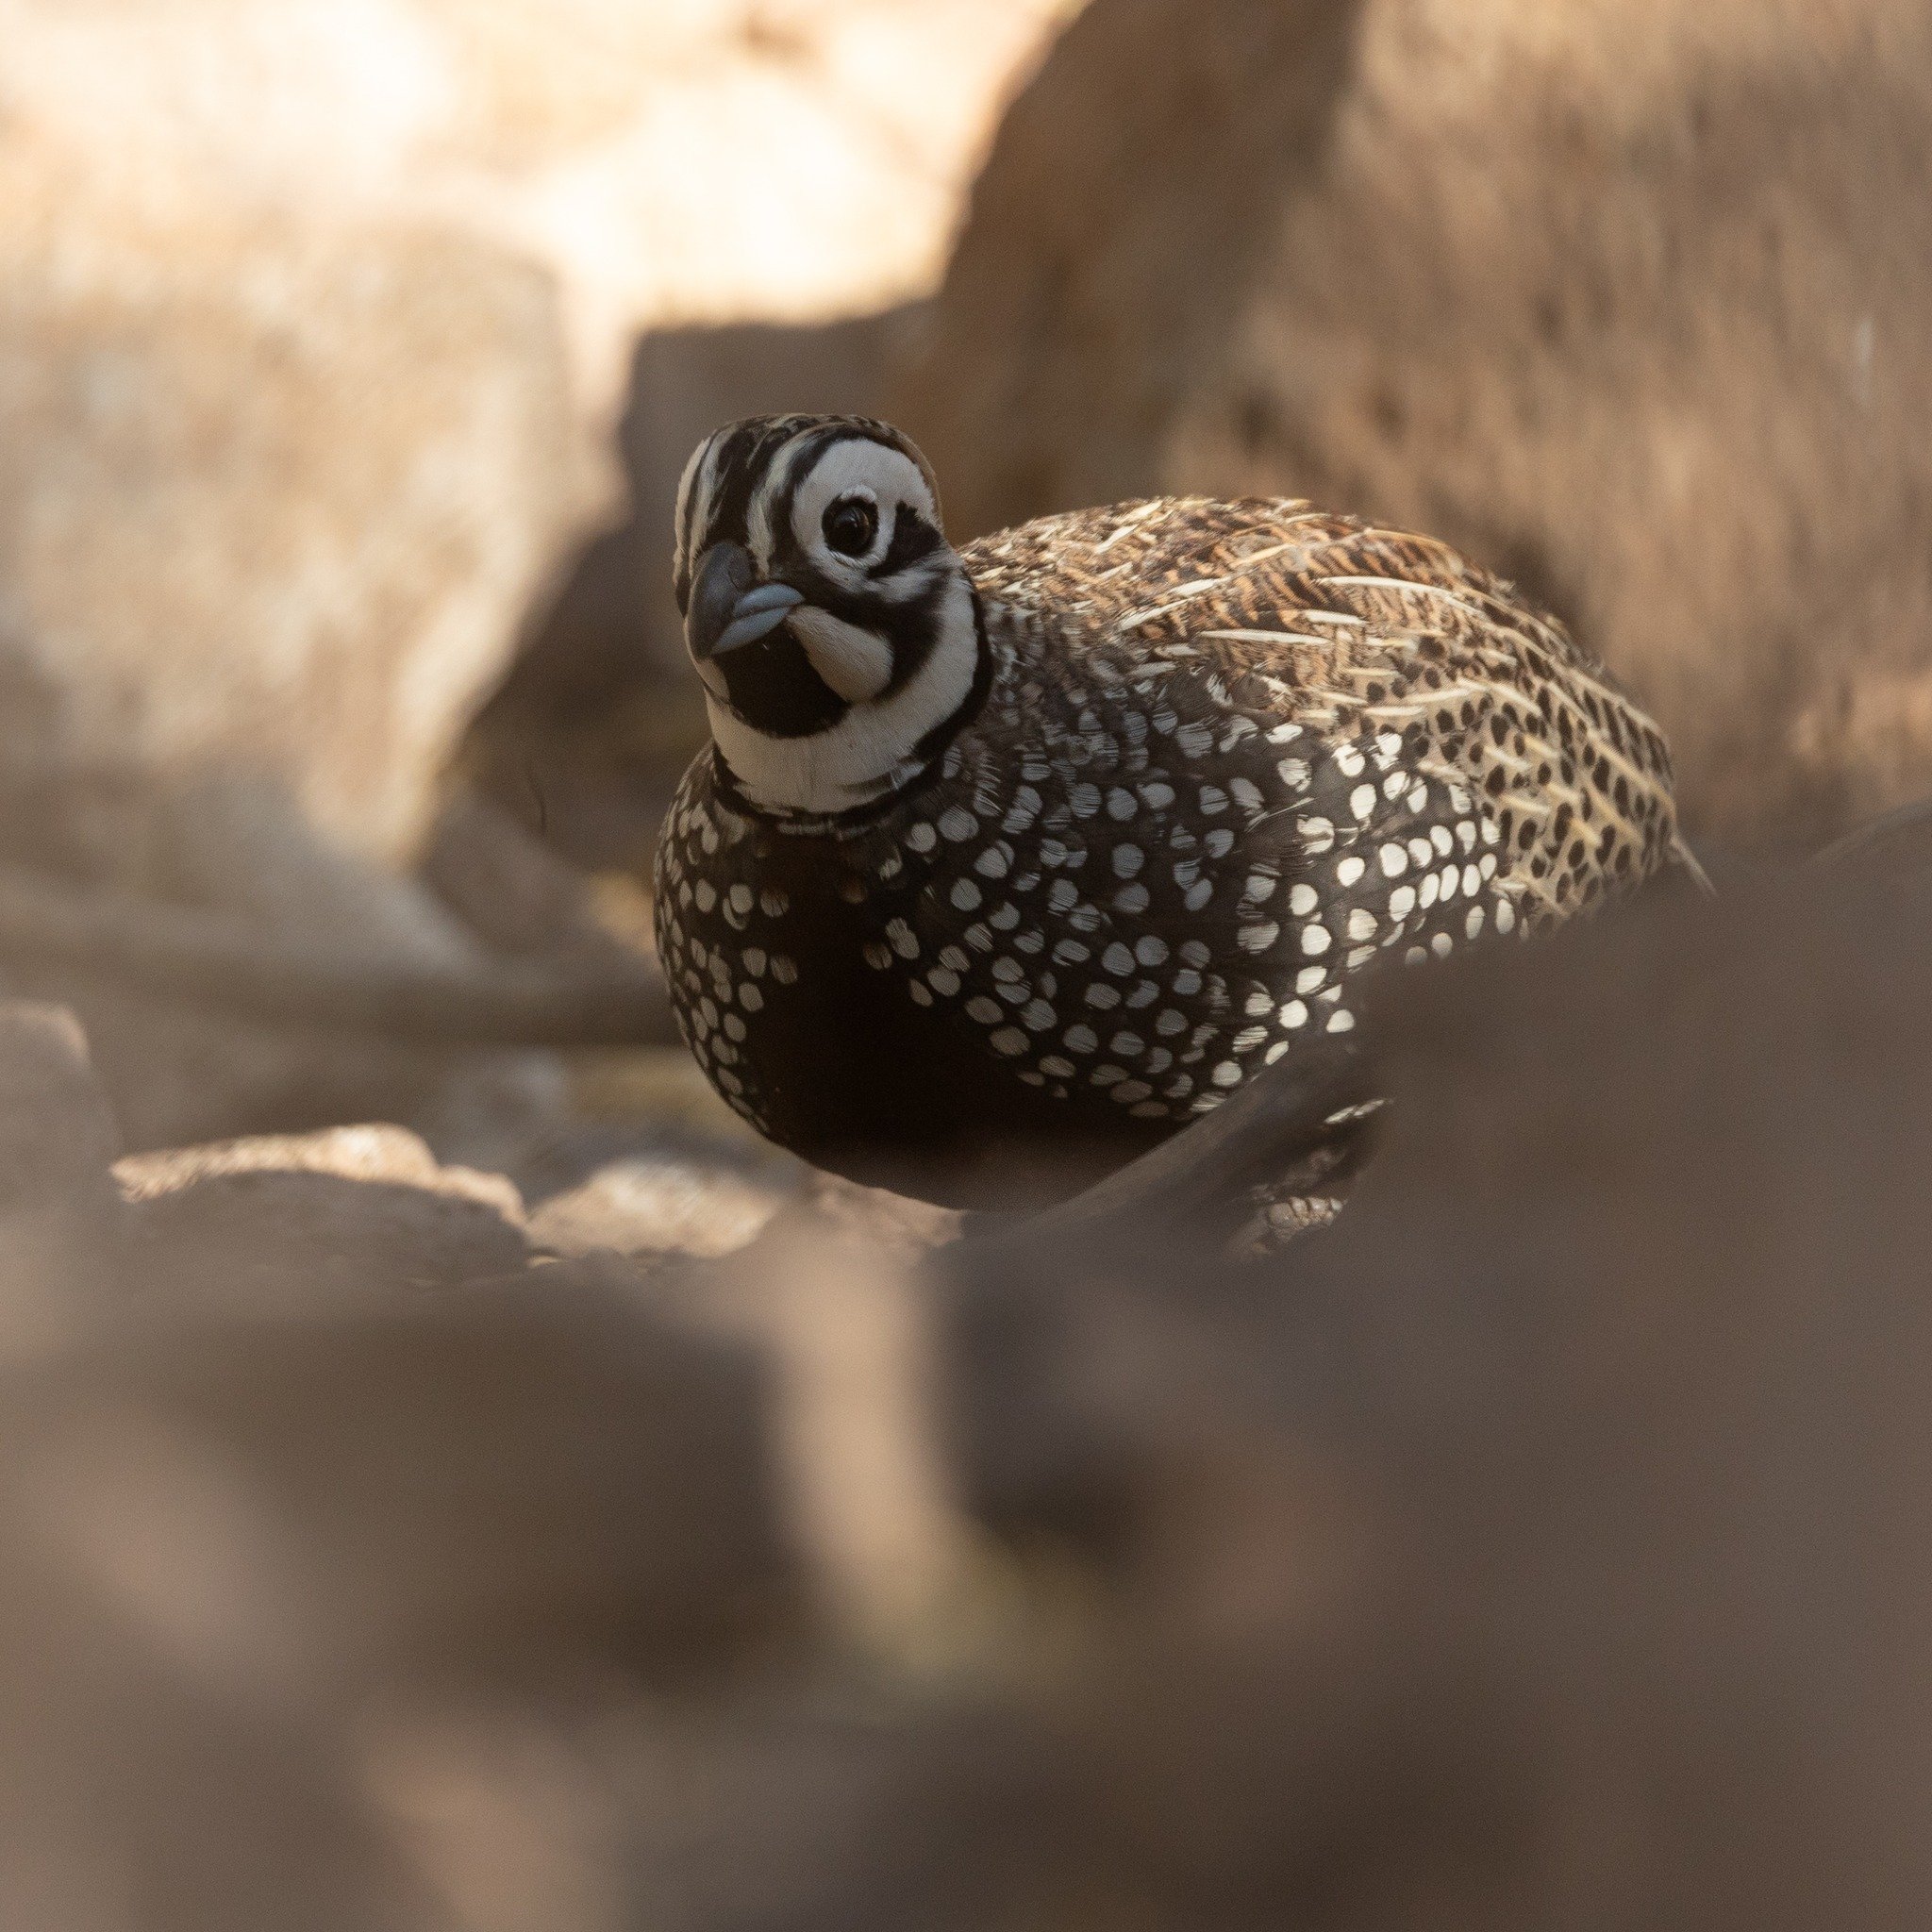 Montezuma Quail made the Top 5 Birds of the Trip lists on both of our recent Texas Hill Country &amp; Big Bend tours. With views like this at the feeders in Davis Mountains State Park, it's no wonder. We've been running this trip since 2017 and this 